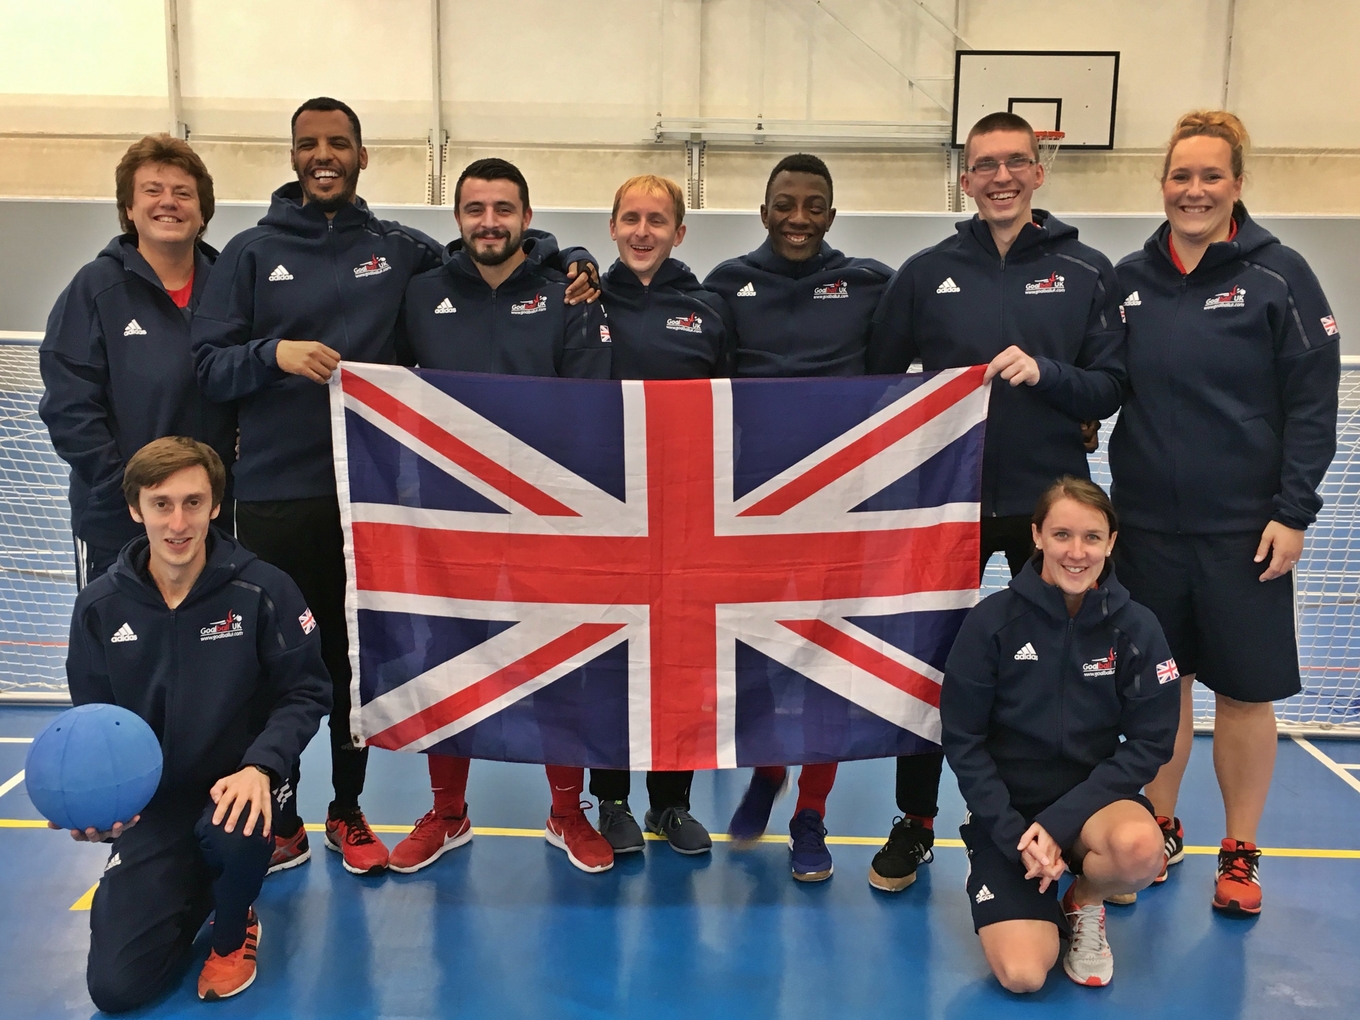 Image shows Faye (bottom right) with the 2017 GB Men's team holding the Union Jack flag